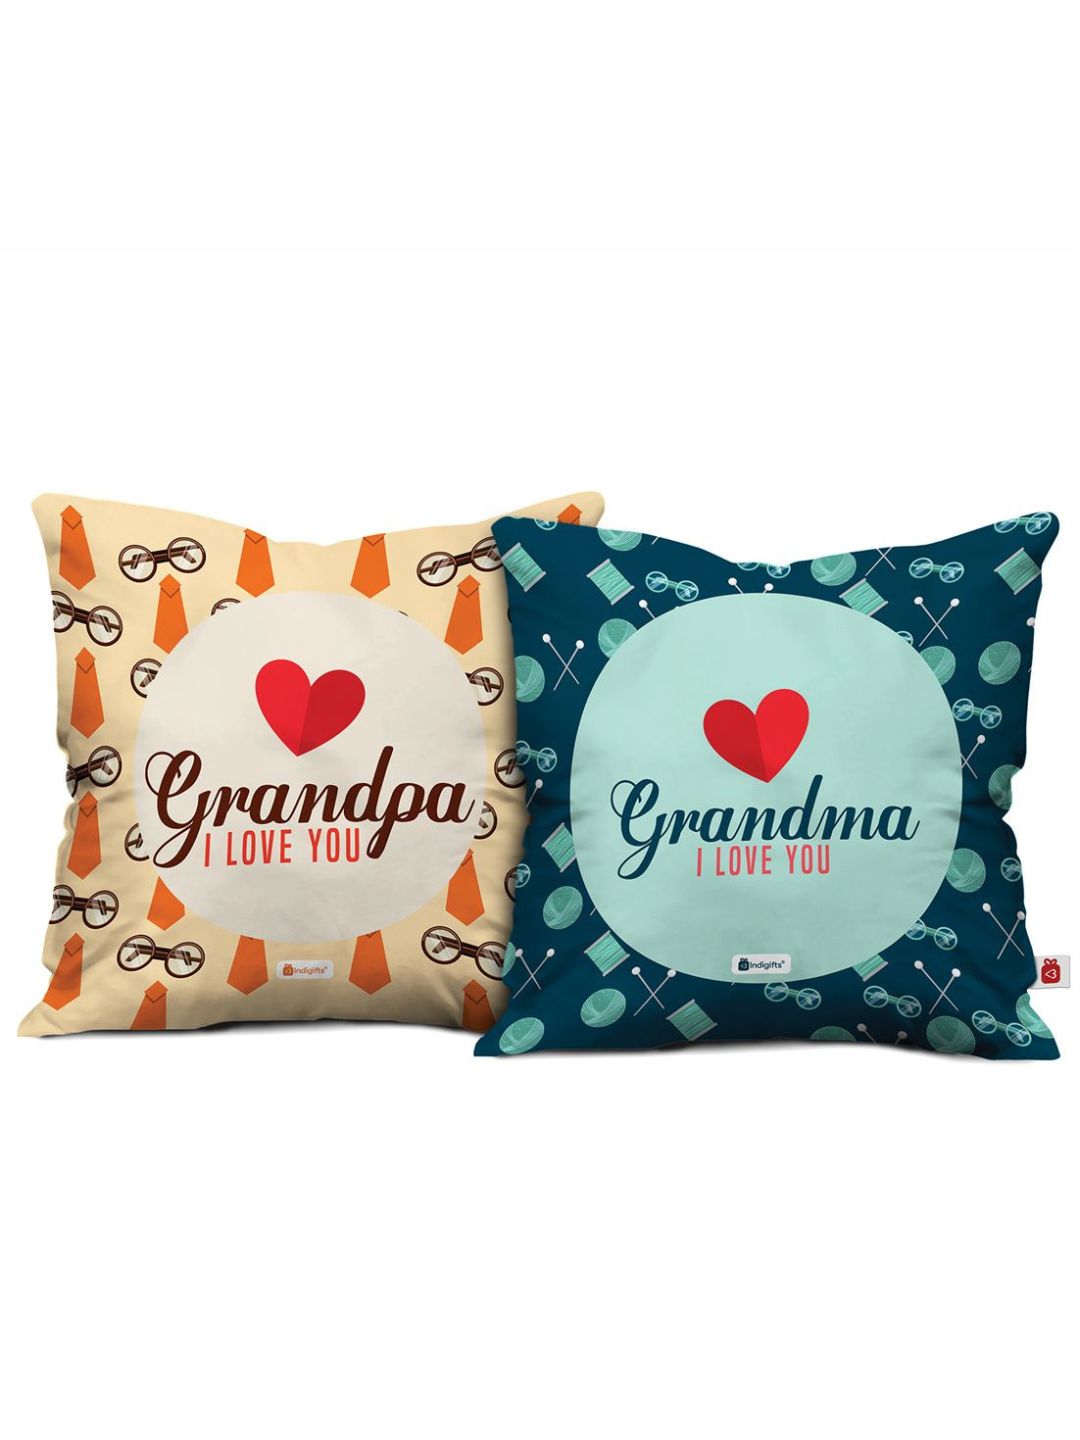 Indigifts Grandpa Grandma Cushions with Filler, 12×12 inches, Multicolour, Set of 2, Polycotton|Home Decor| Gift for Grand Parents | Gift for Parents | Gift for Dada Dadi|Gift for Grandparents Day